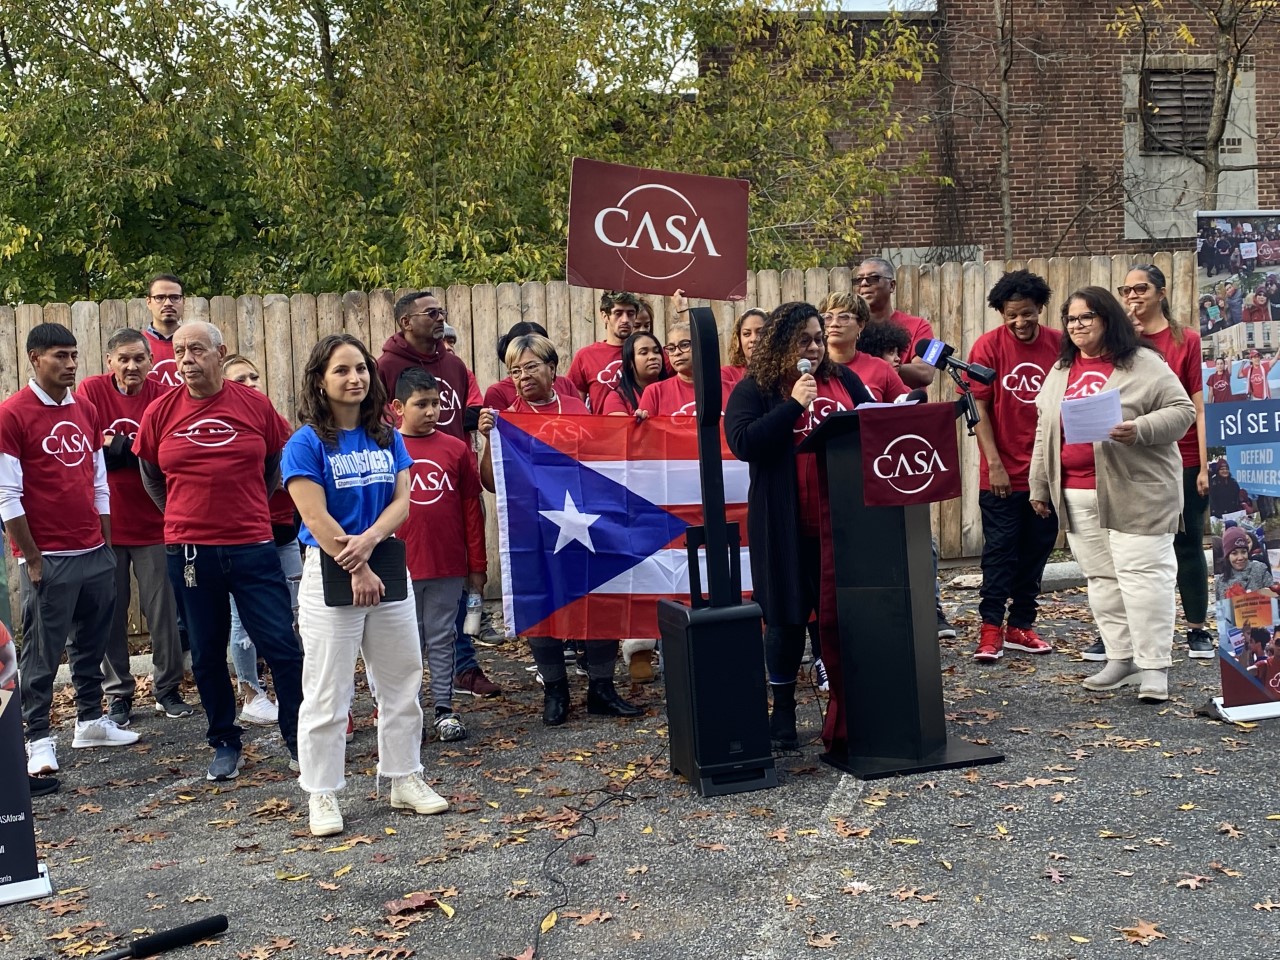 CASA members hold press event to celebrate agreement with York county commissioners.